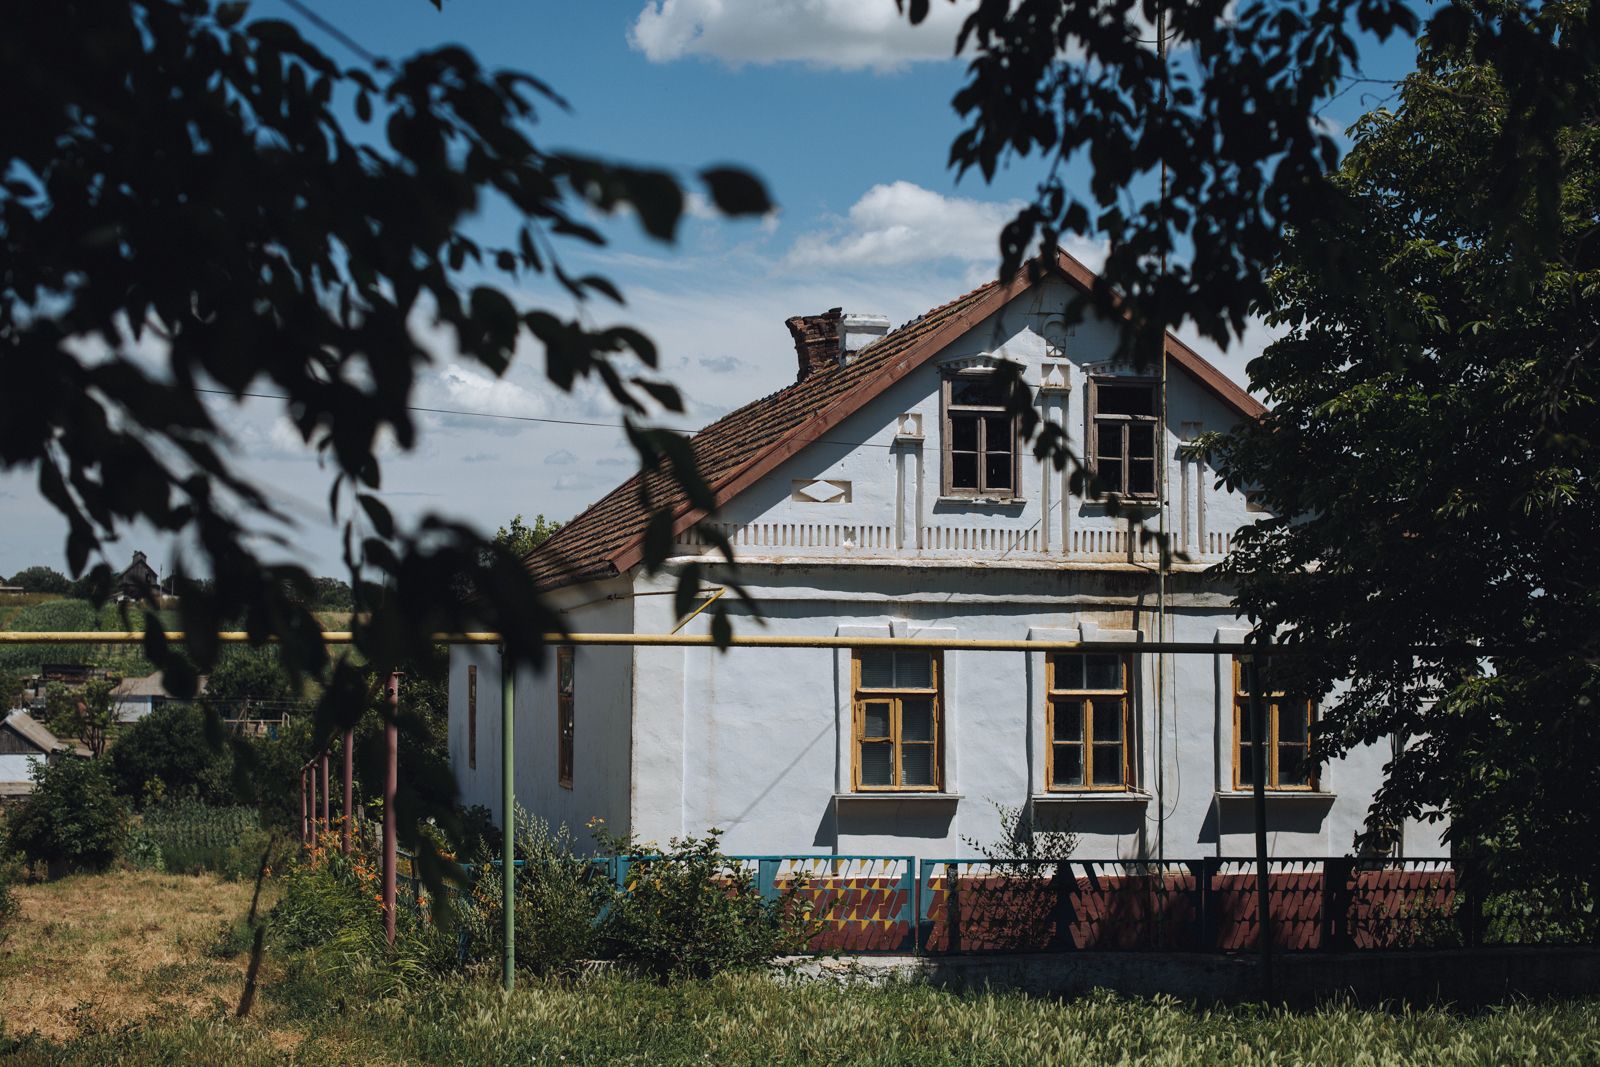 © Anton Polyakov - Image from the Home on the border photography project